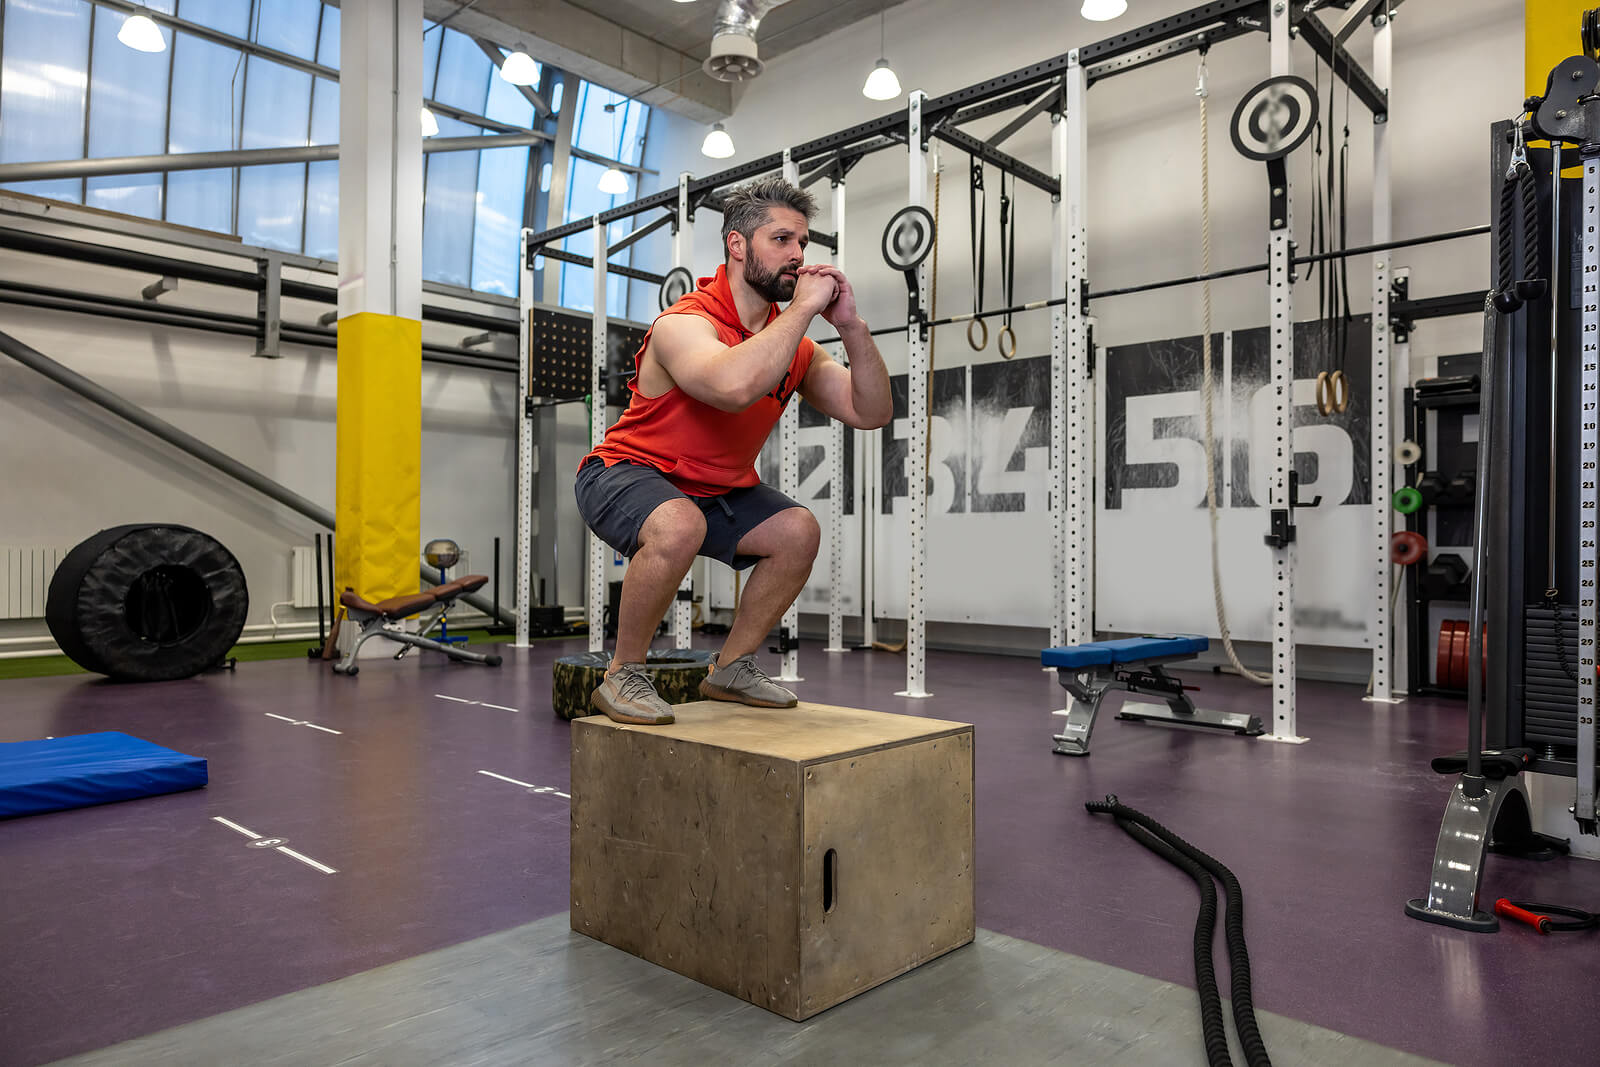 Bearded Man Having Workout, Jumping Up On Wooden Box In Crossfit